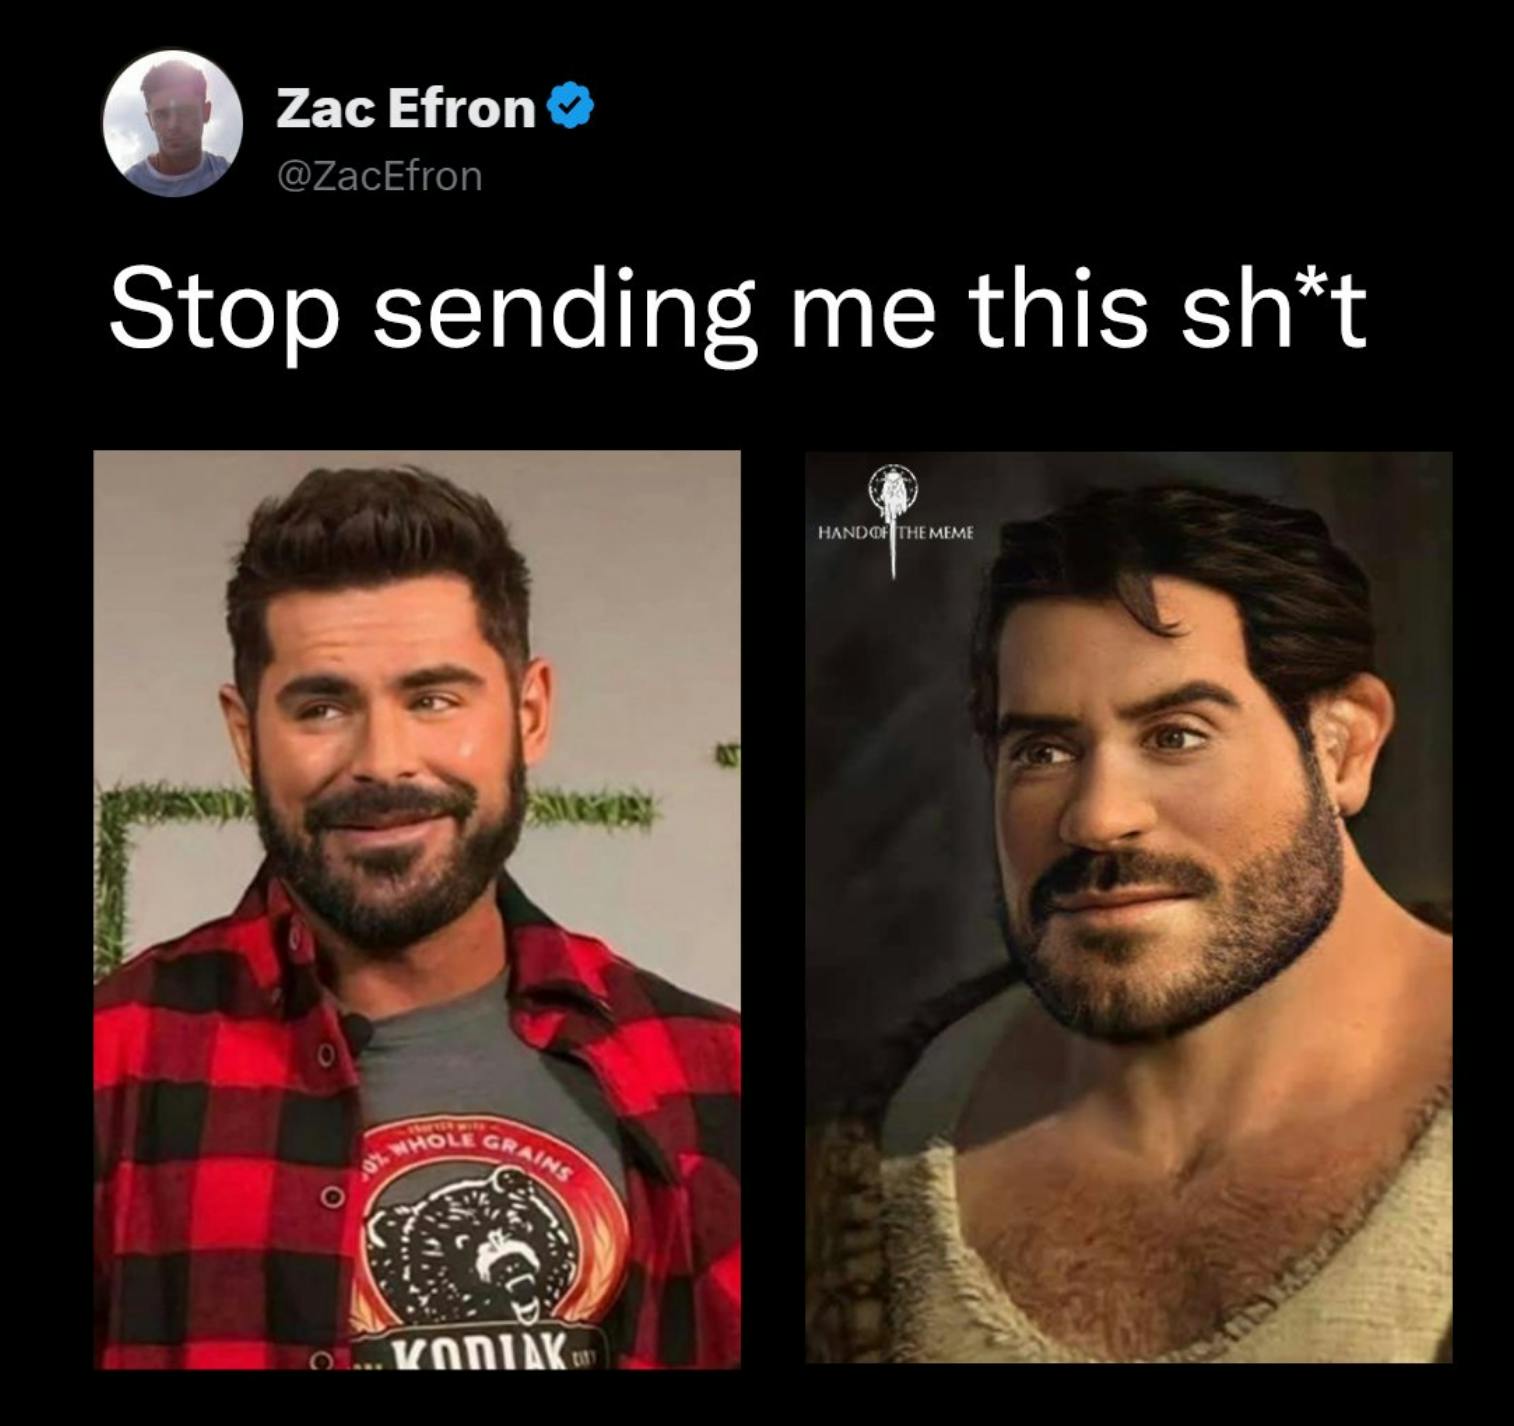 Facebook post by Hand-of-the-Meme of Human Shrek and Zac Efron